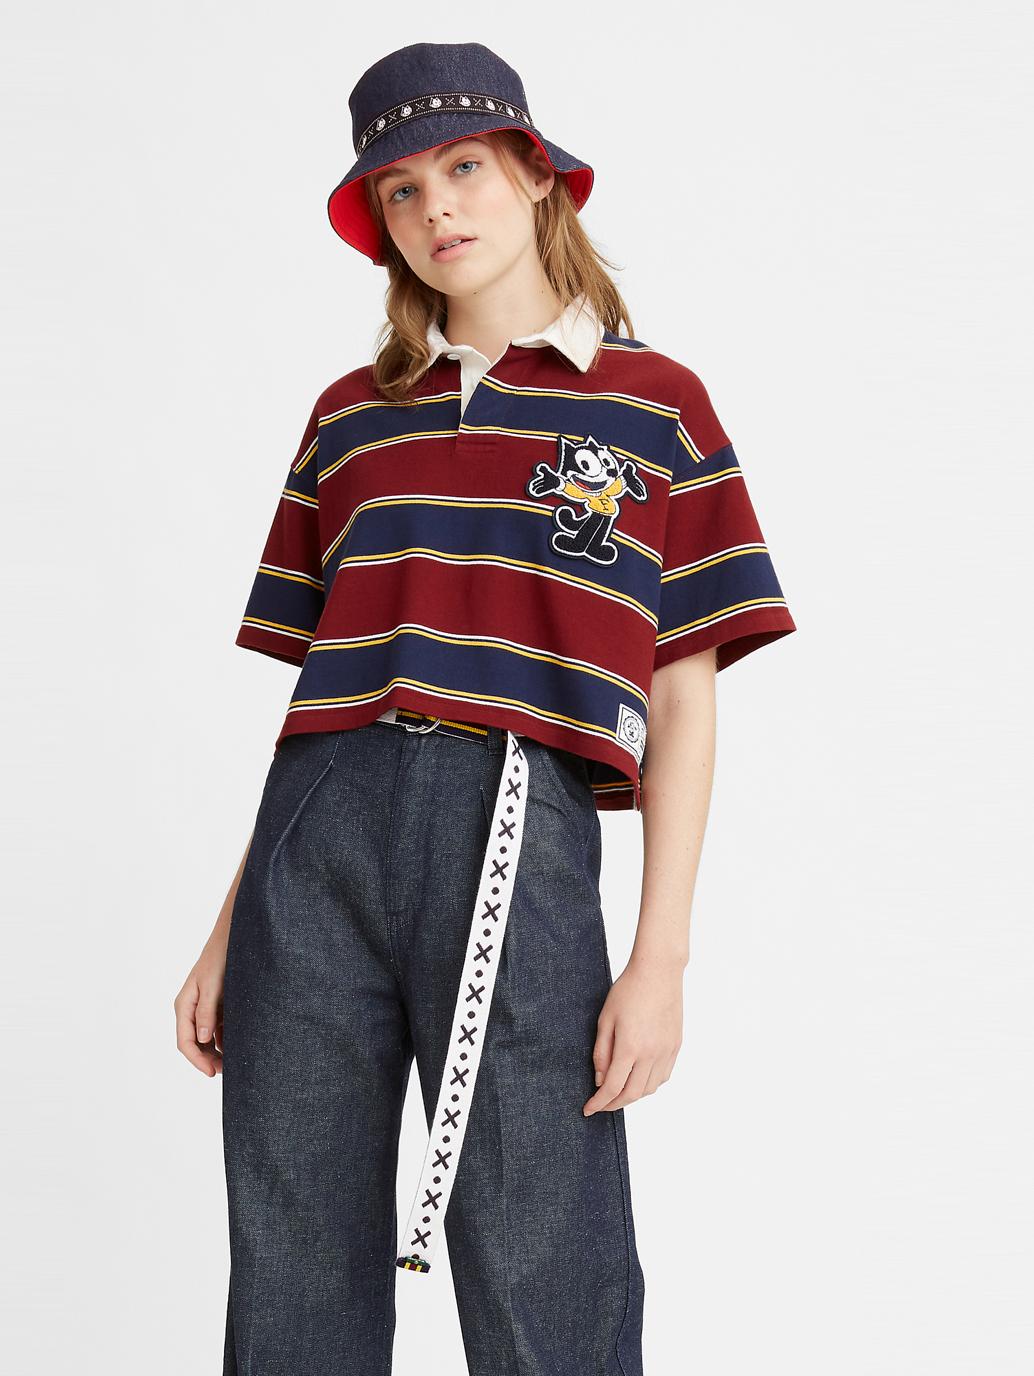 levis malaysia x felix the cat womens cropped rugby shirt A12360000 10 Model Front